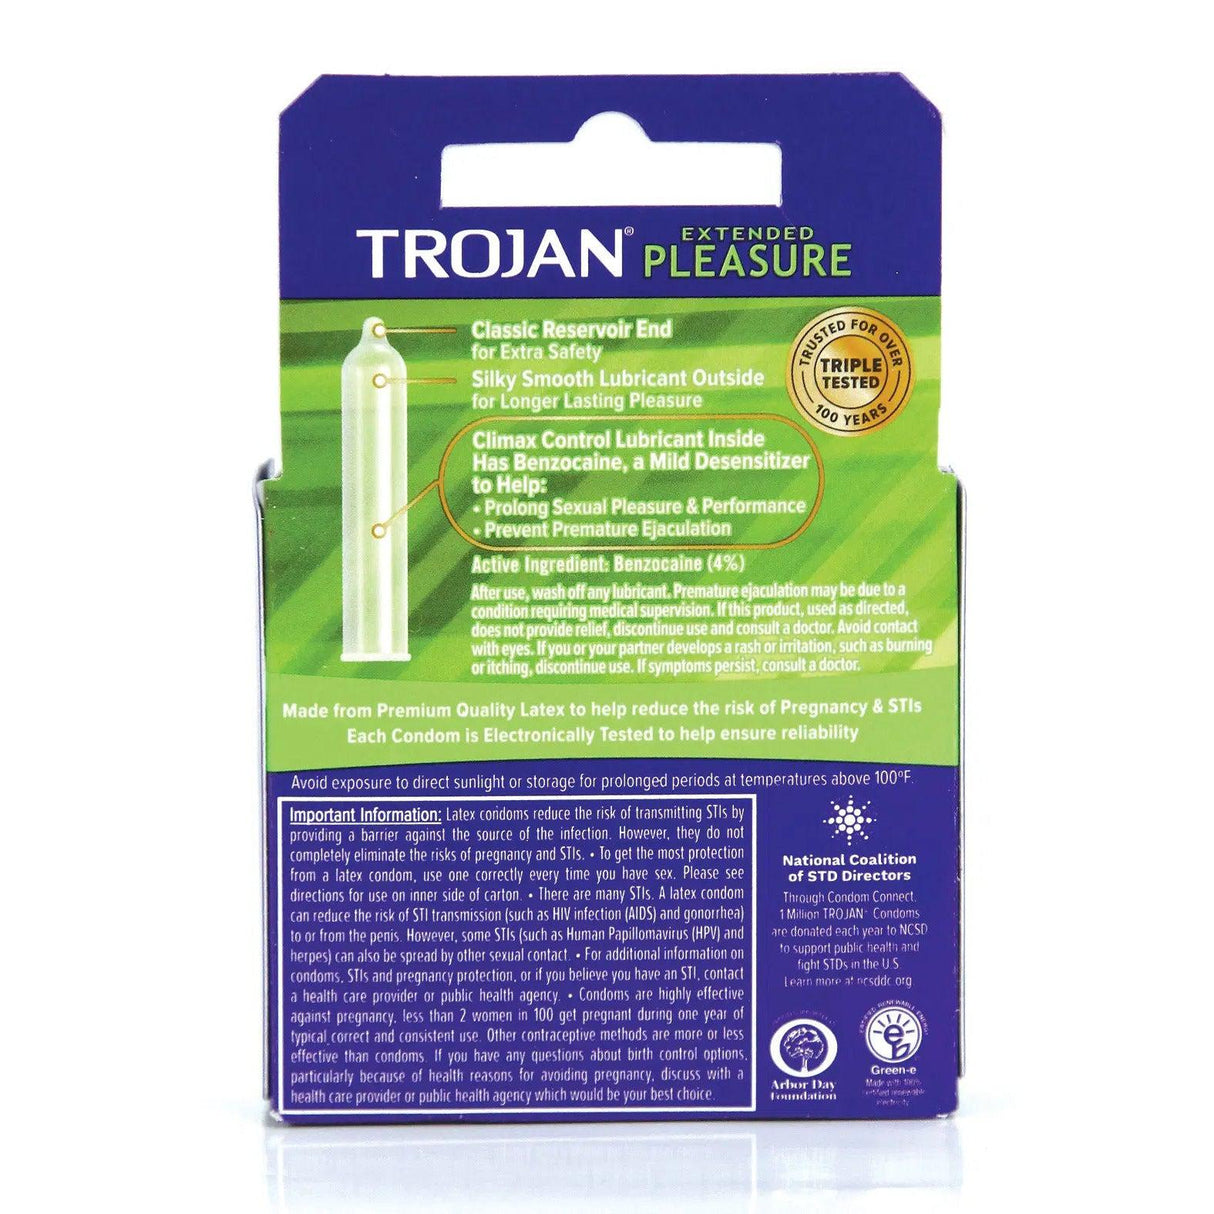 Trojan Extended Pleasure Condoms with Climax Control Lubricant